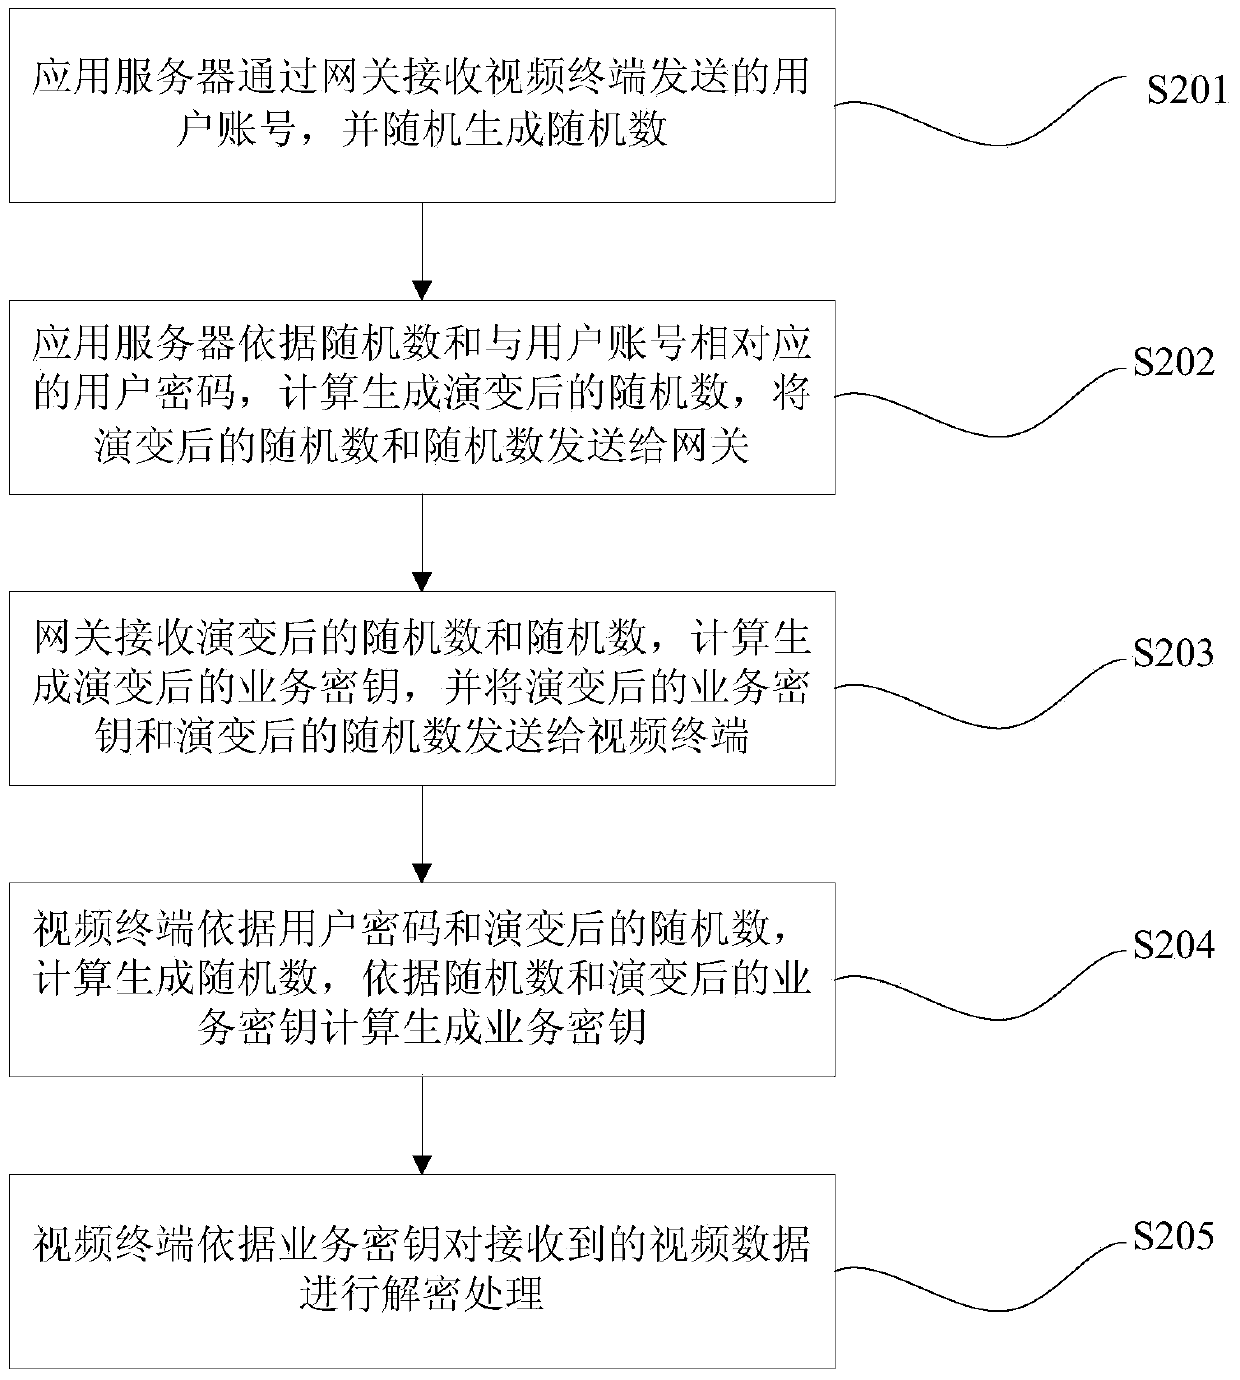 System and method for operation of digital television subscriber management system